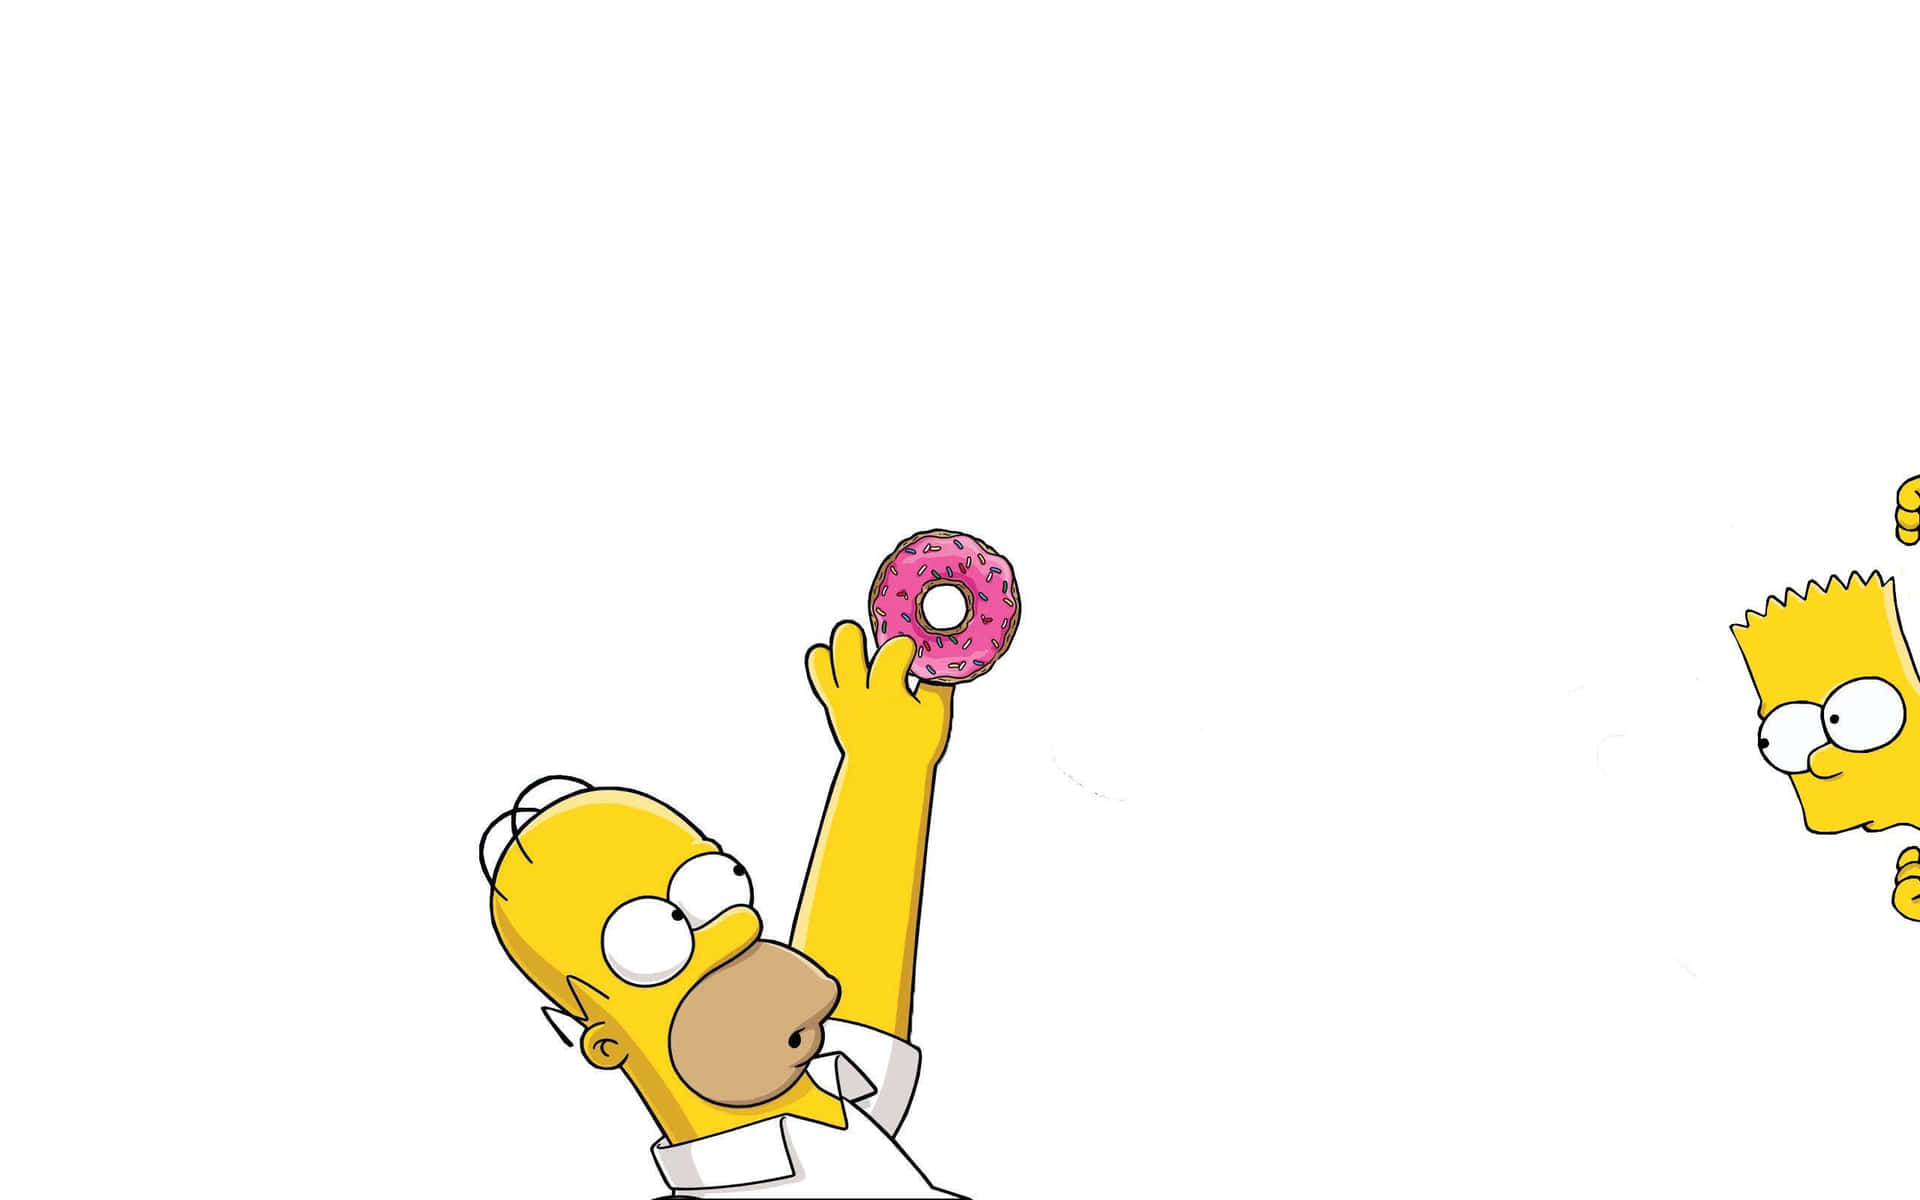 "Before there were memes, there were The Simpsons™ - a pop-culture phenomenon since 1989." Wallpaper